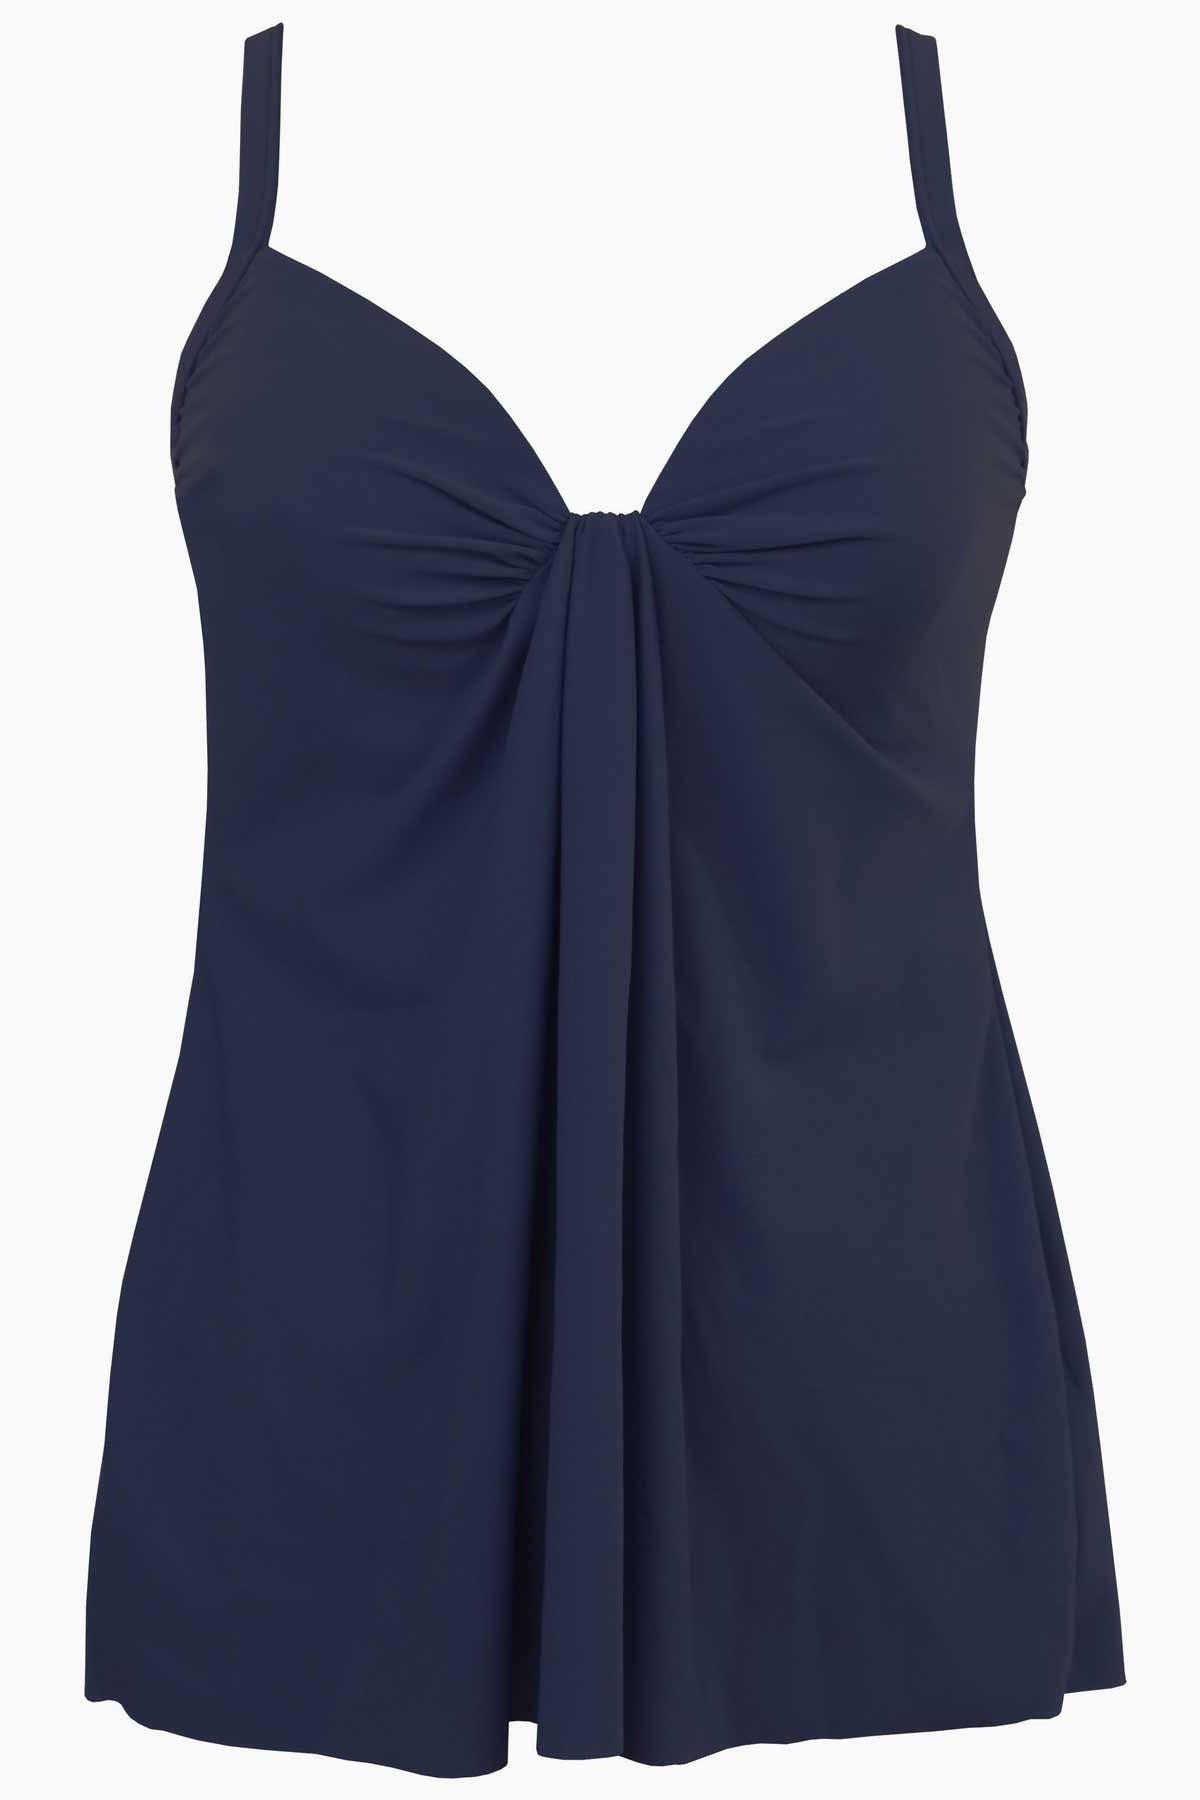 Miraclesuit Rock Solid Marina Underwire Tankini Top - Macy's